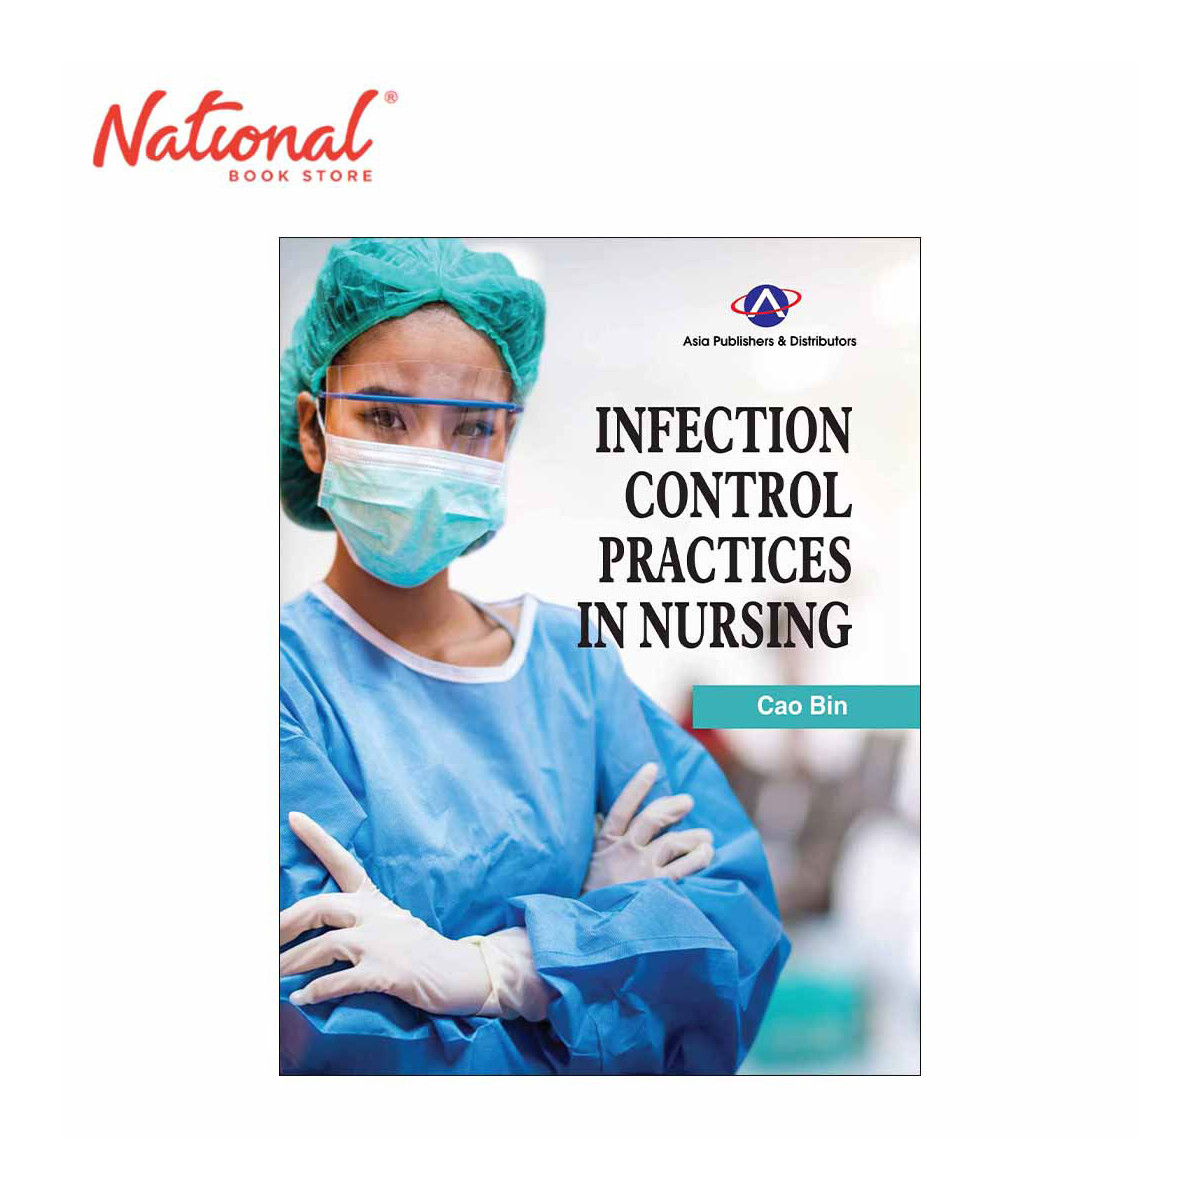 Infection Control Practices in Nursing by Cao Bin - Trade Paperback - College Books